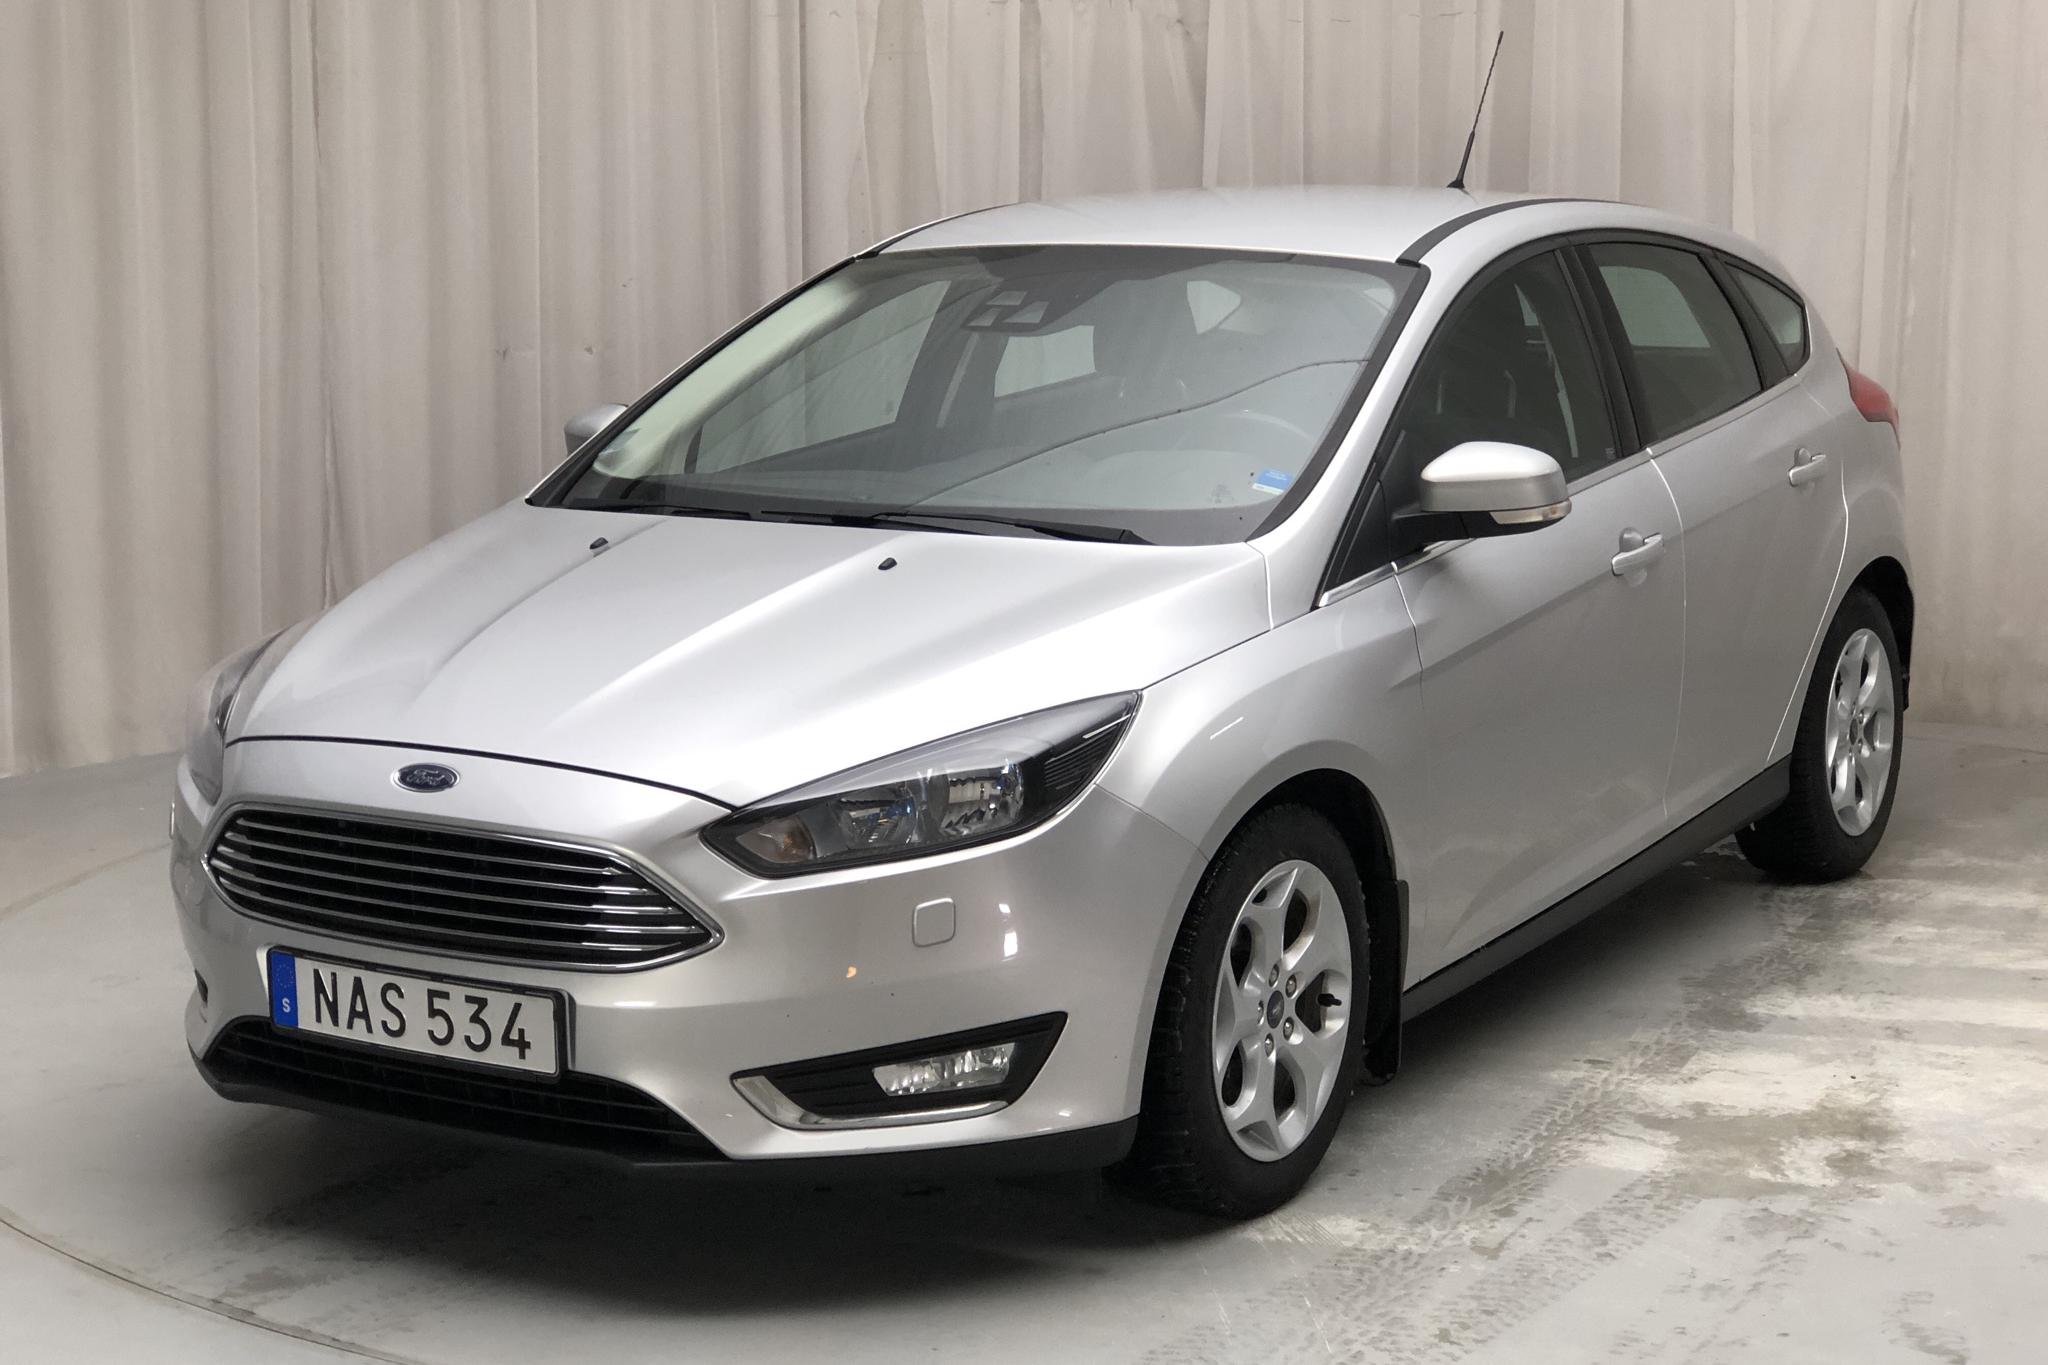 Ford Focus 1.0 EcoBoost 5dr (125hk) - 75 240 km - Manual - gray - 2016